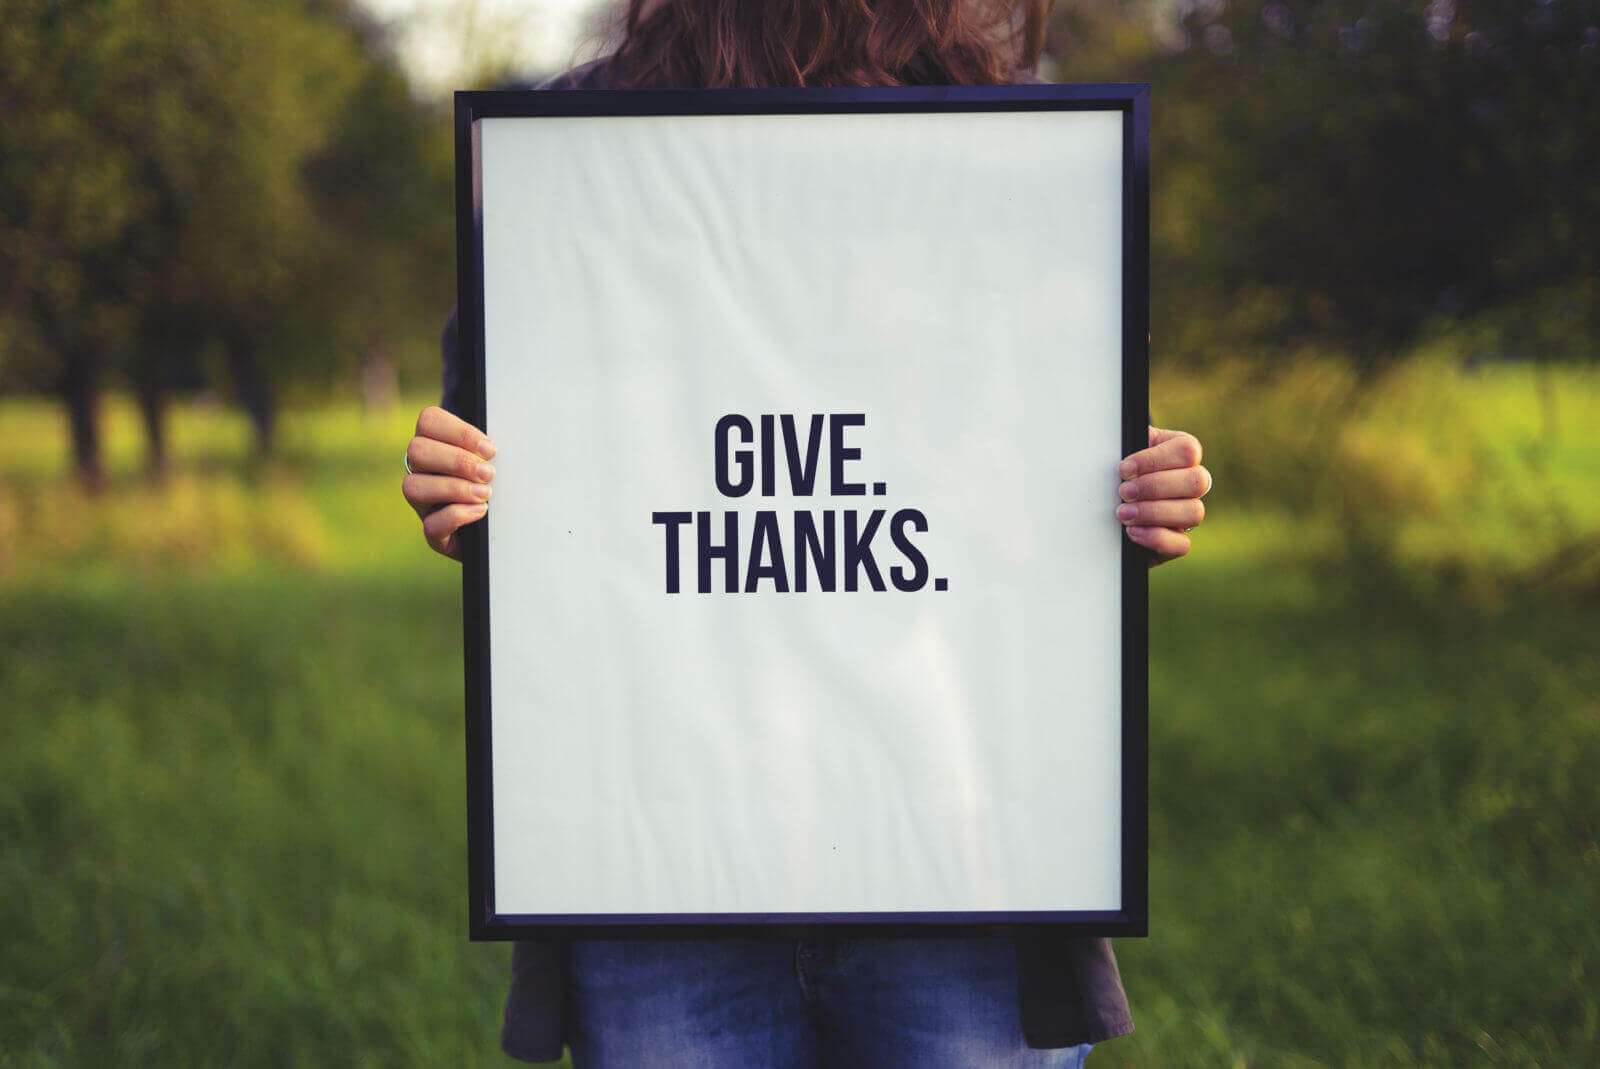 Give. Thanks.